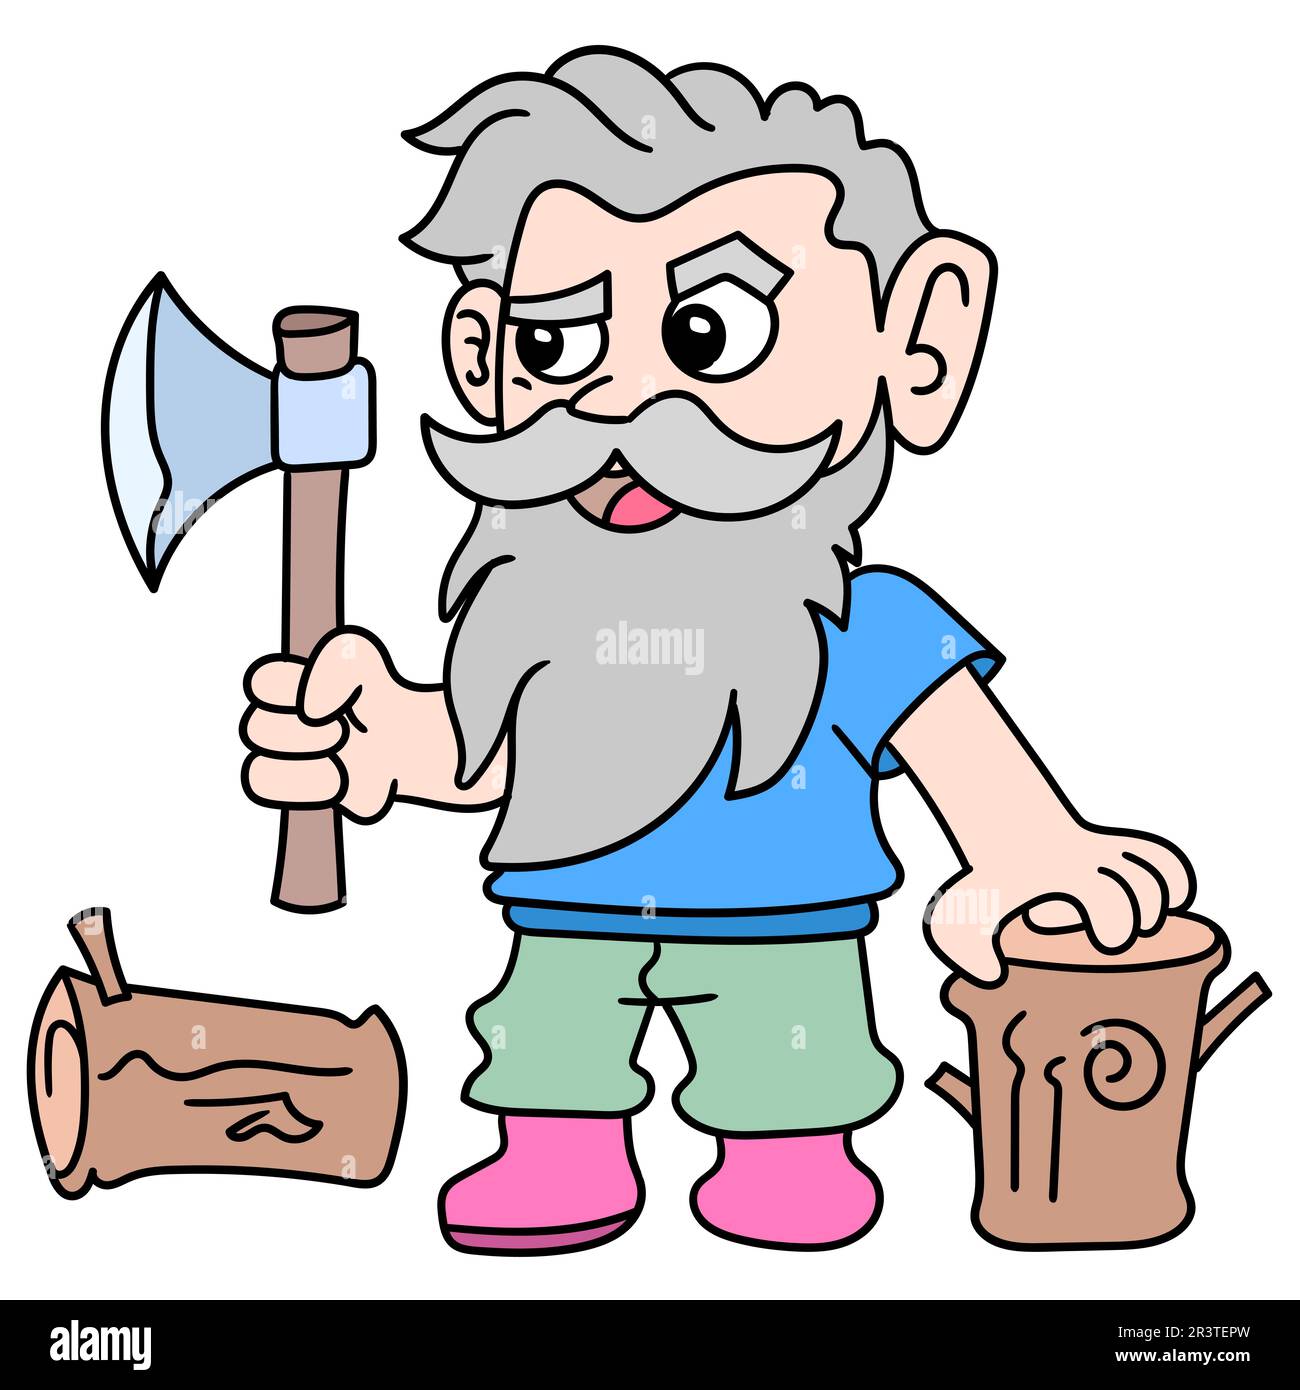 Old woodcutter carrying ax chopping wood, doodle icon image kawaii Stock Photo